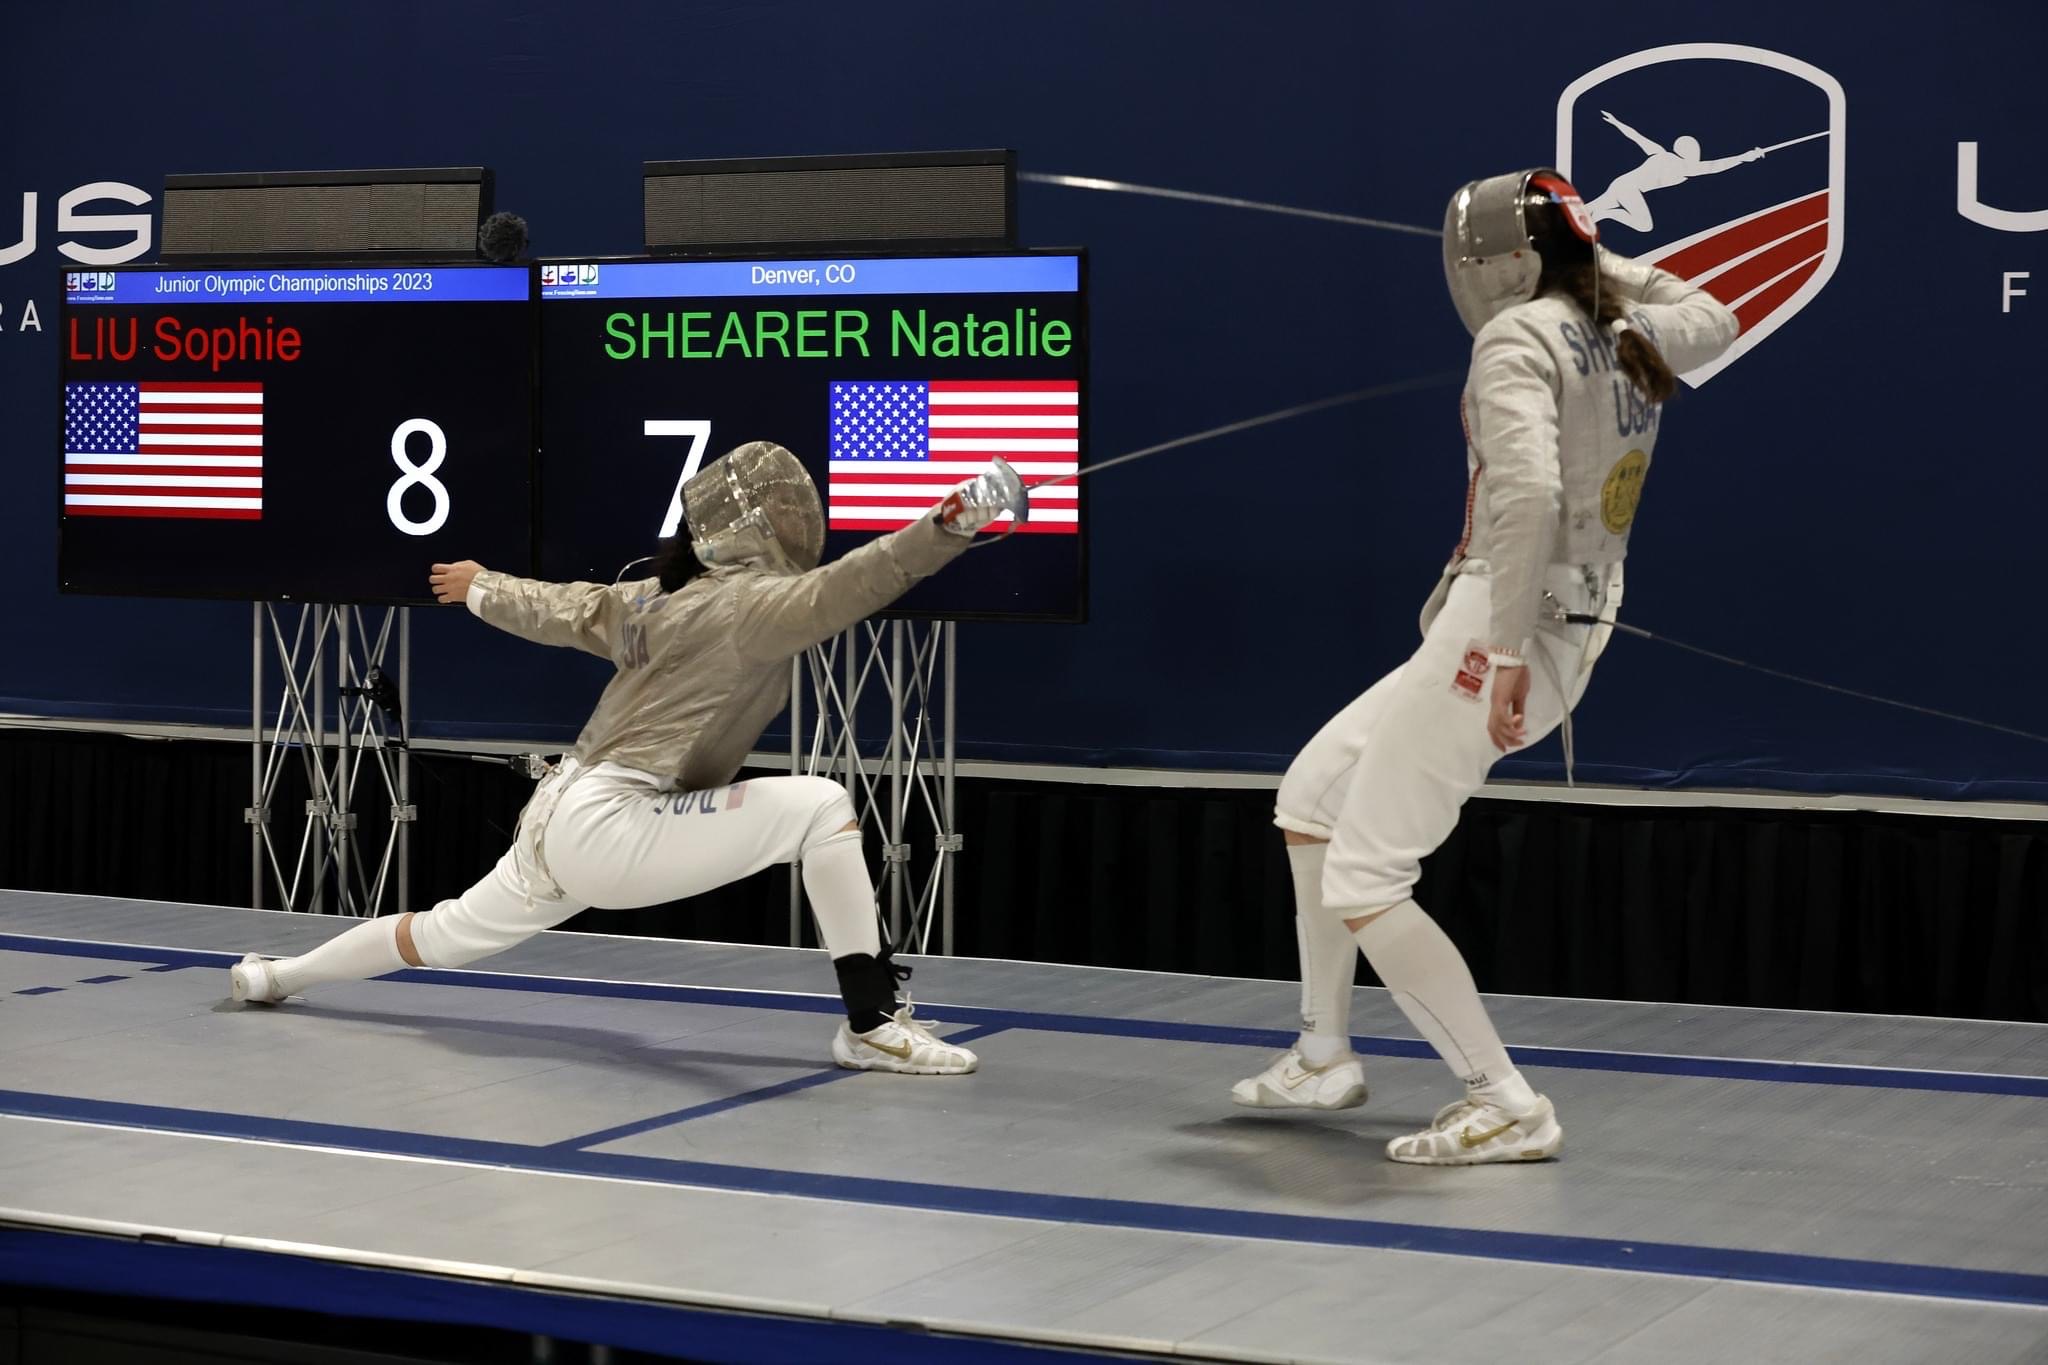 Sophomore Sophie Liu challenges her opponent over Presidents Day weekend at the Cadet Womens Saber in Junior Olympics in Denver, Colorado. Liu said fencing, has brought me so many amazing opportunities and taught me so much about being strong and perseverance.